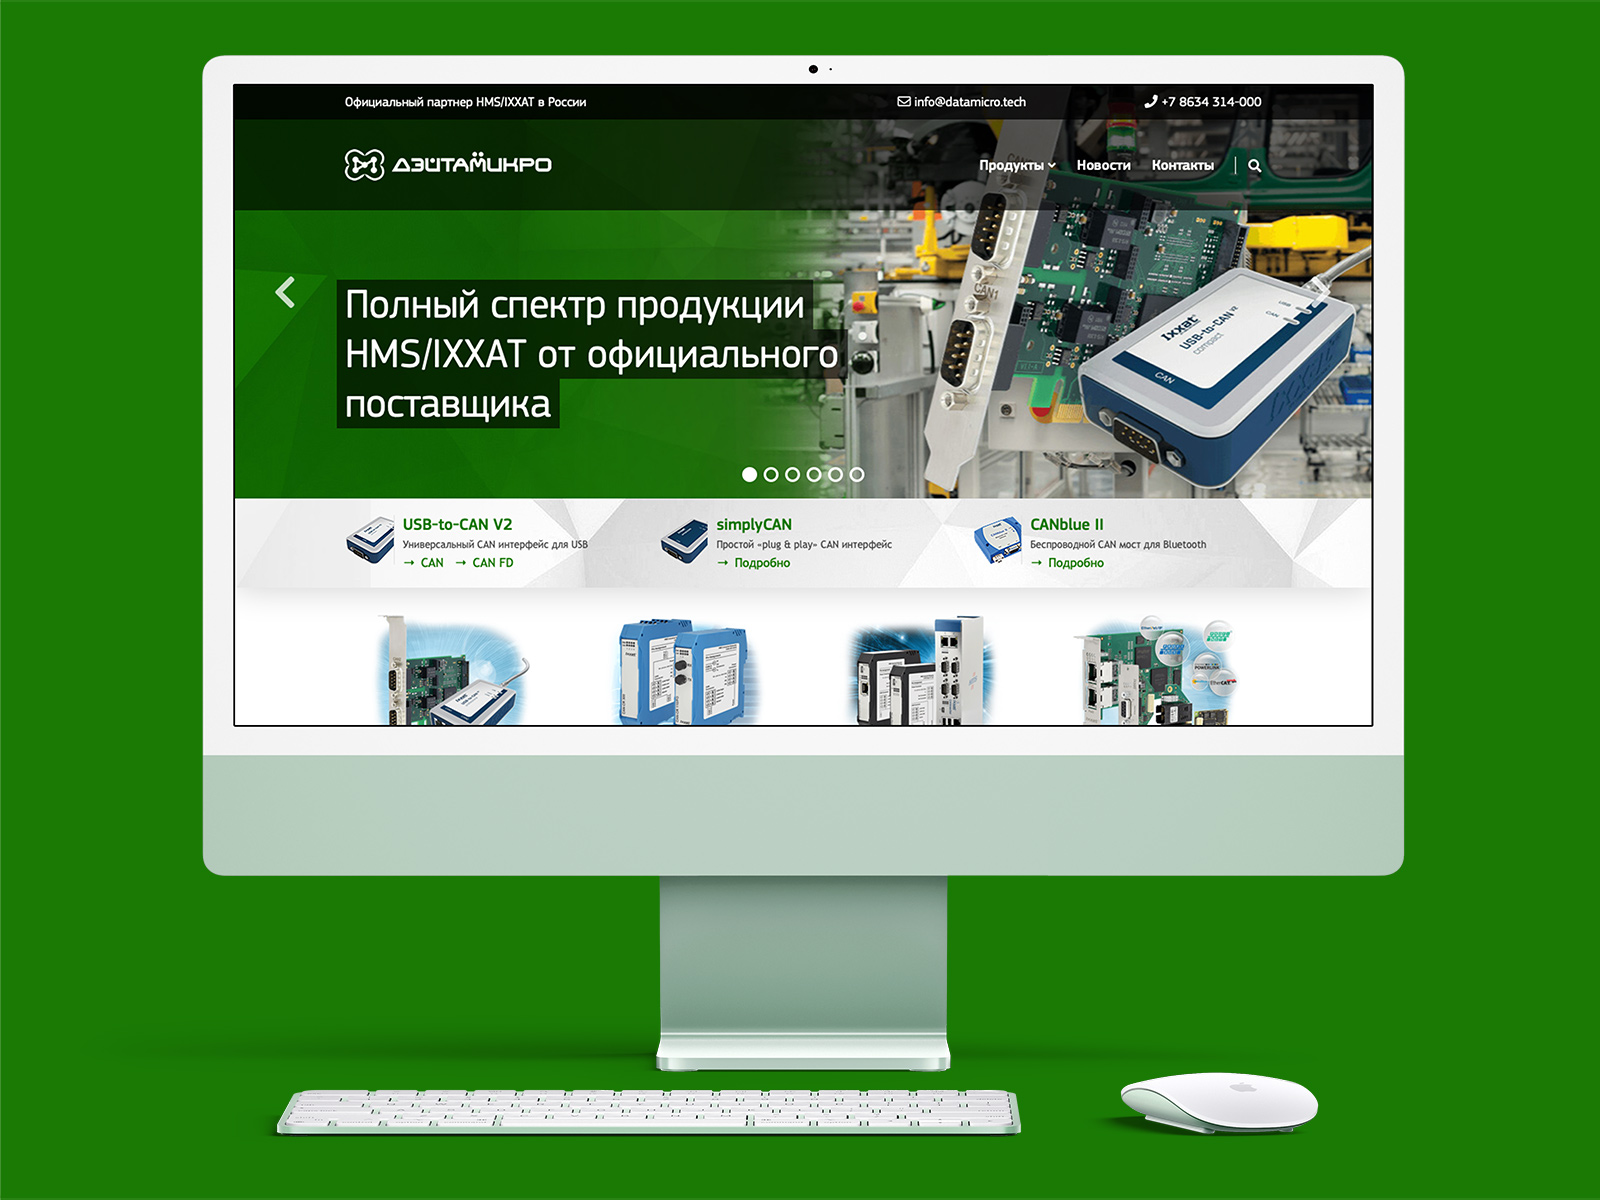 Corporate website and product catalog of the DATAMICRO